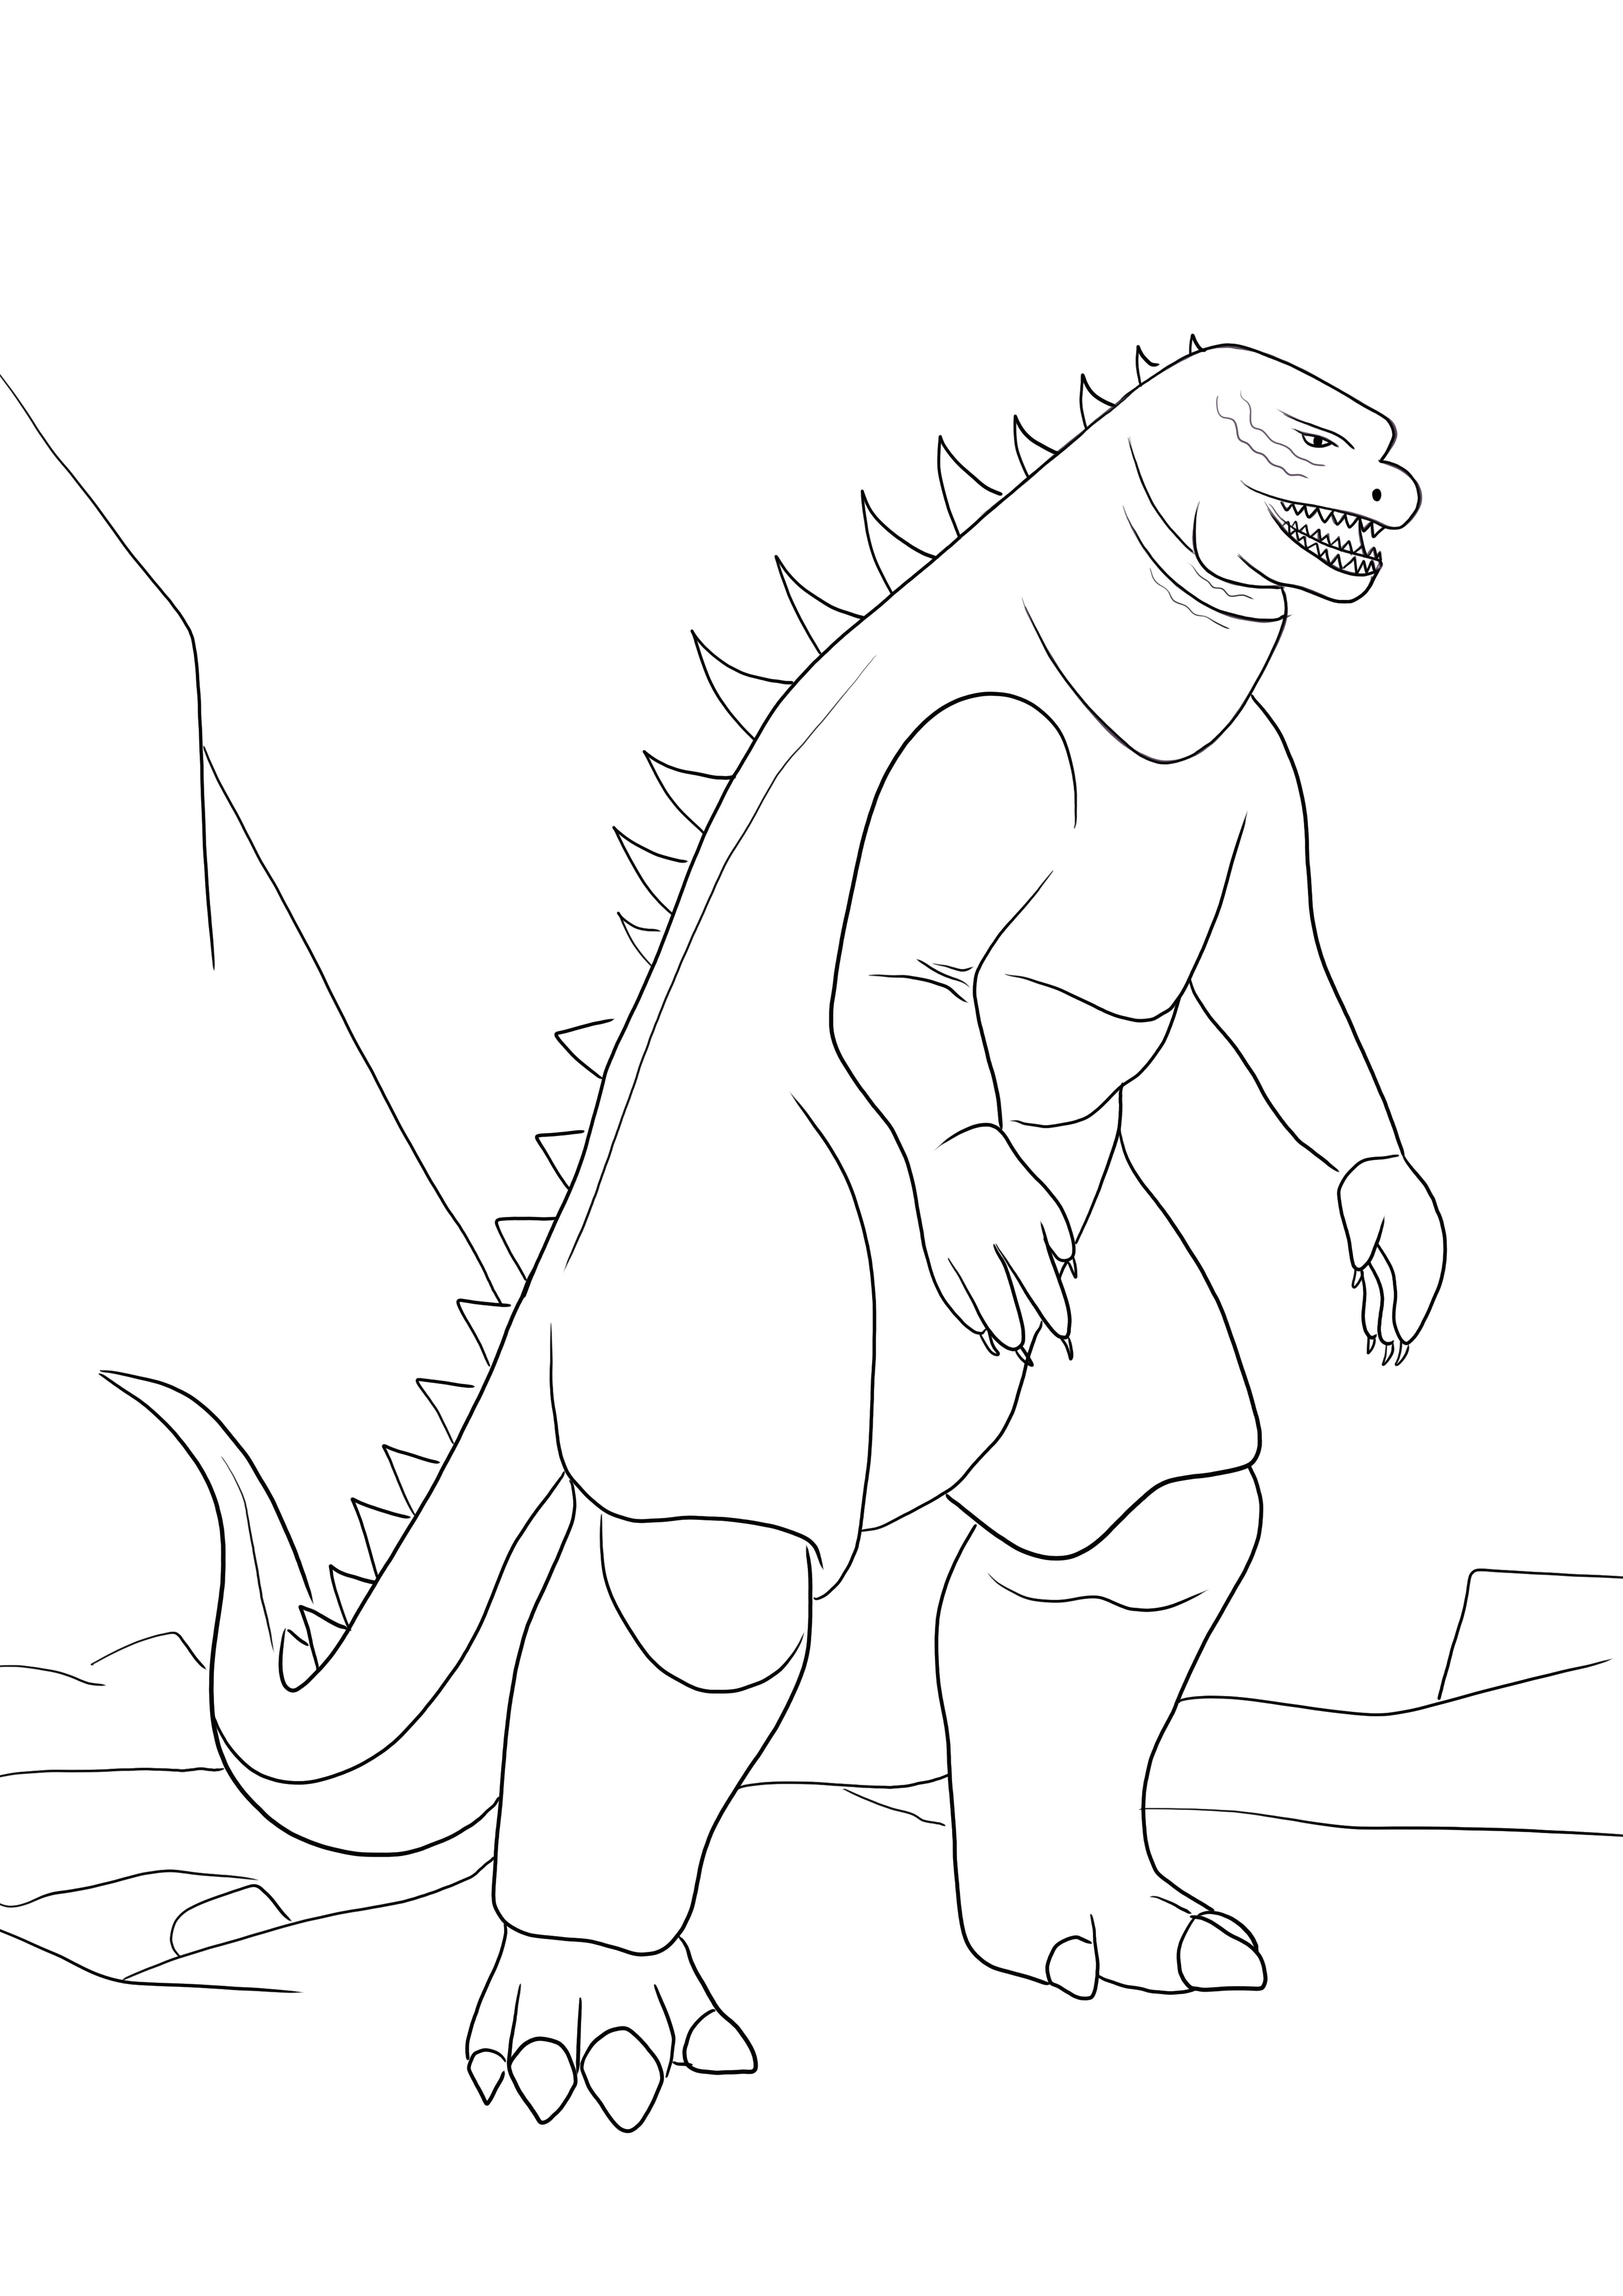 Fierce Godzilla monster coloring page free to download or easy to print